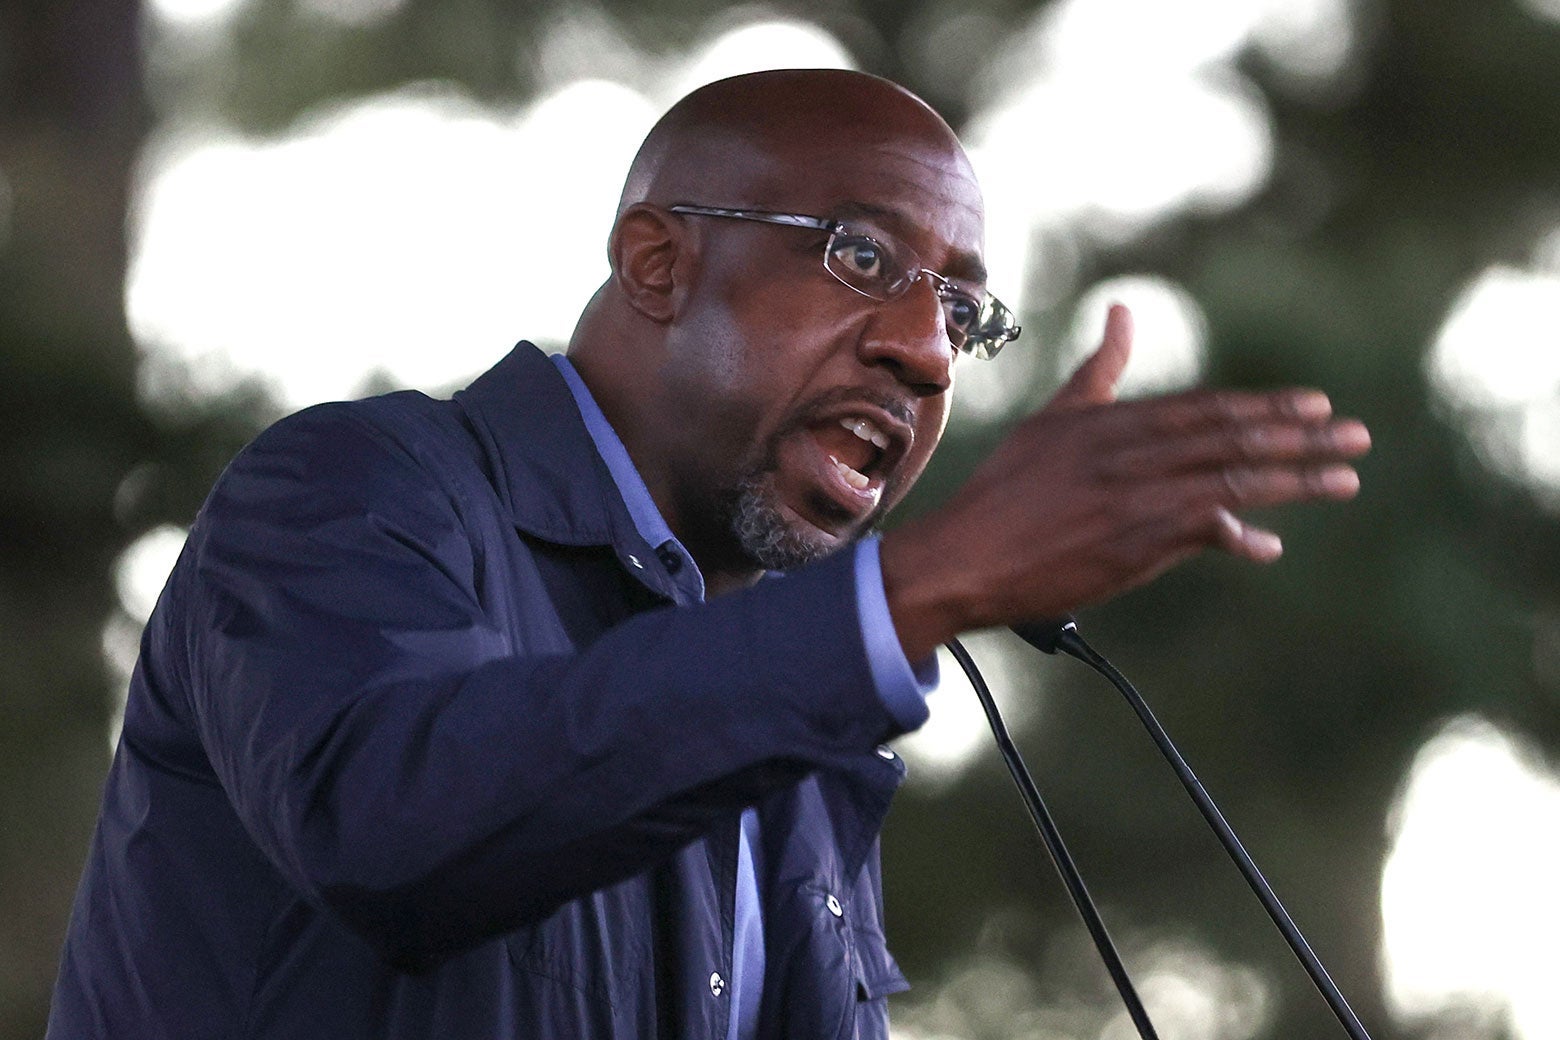 Raphael Warnock gestures while speaking into a microphone.